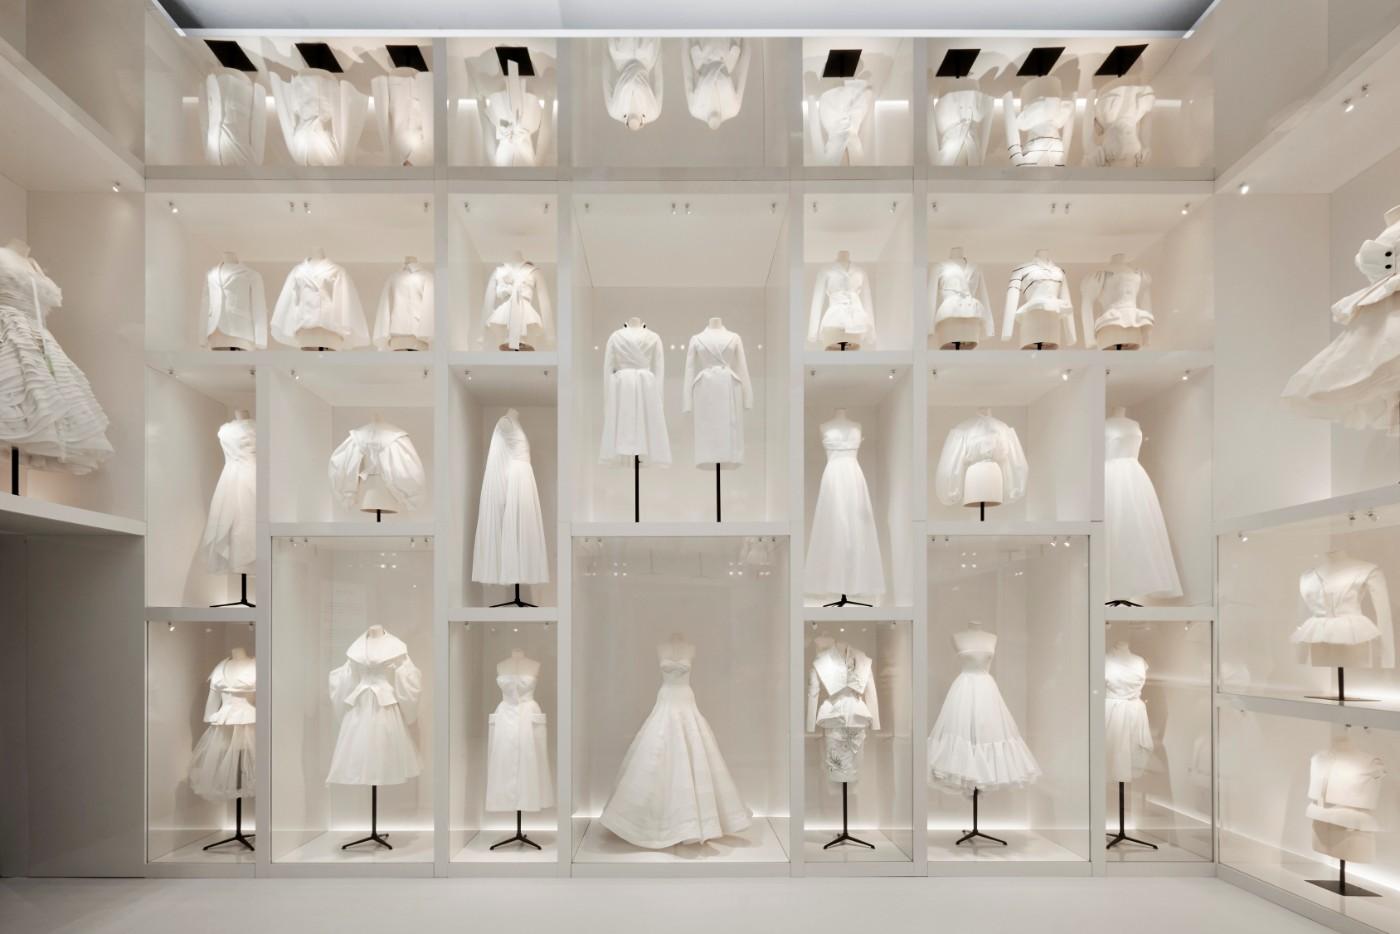 The V&A's Christian Dior Designer of Dreams exhibition, Atelier section